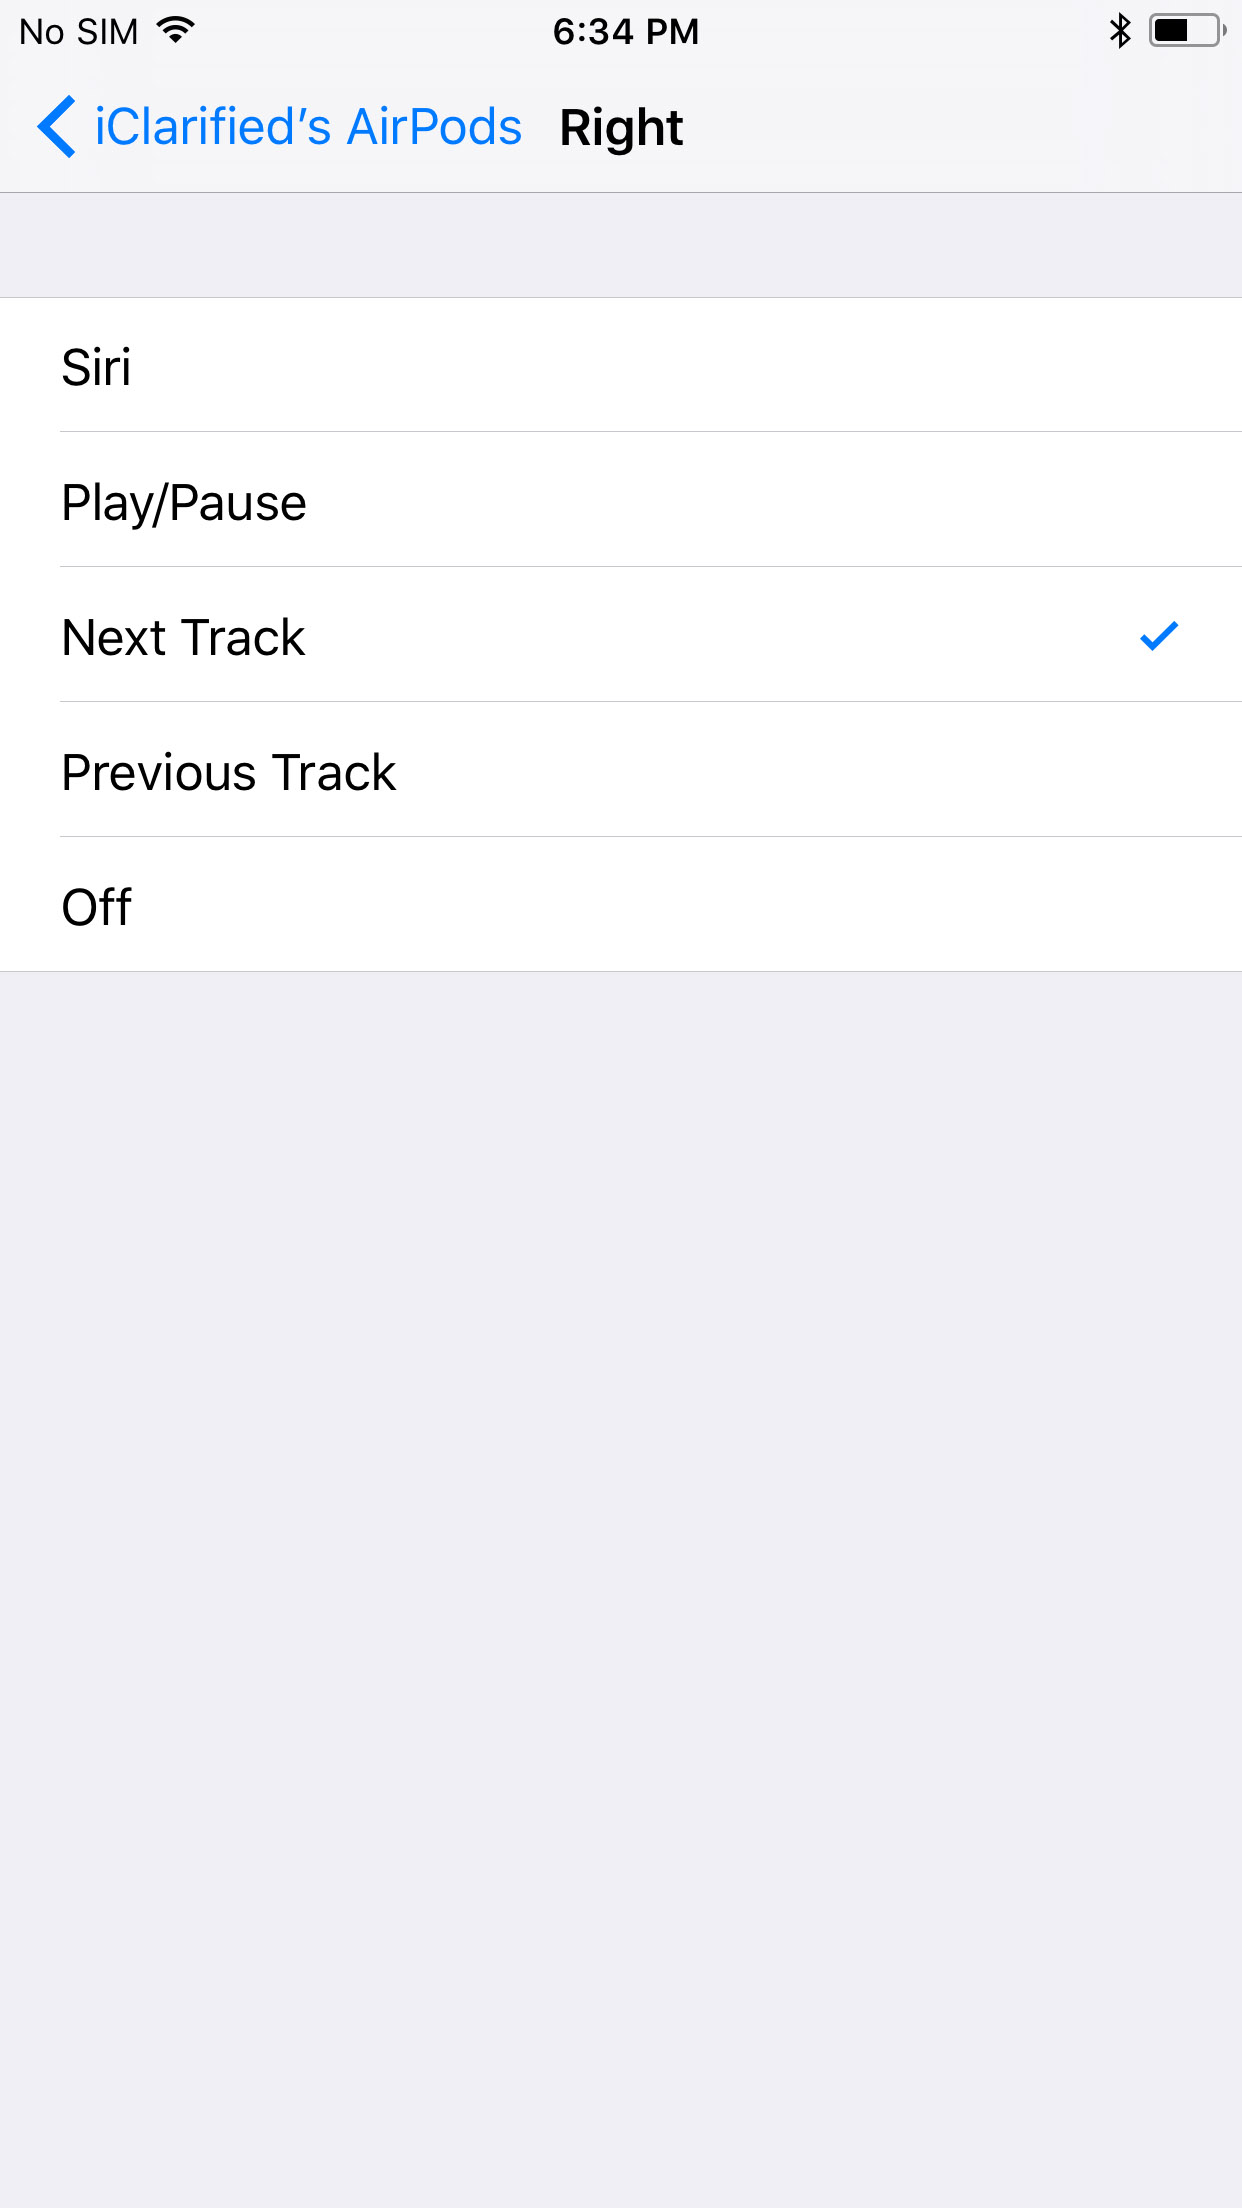 How to Get AirPods Next and Previous Track Functionality to Work on iOS 10